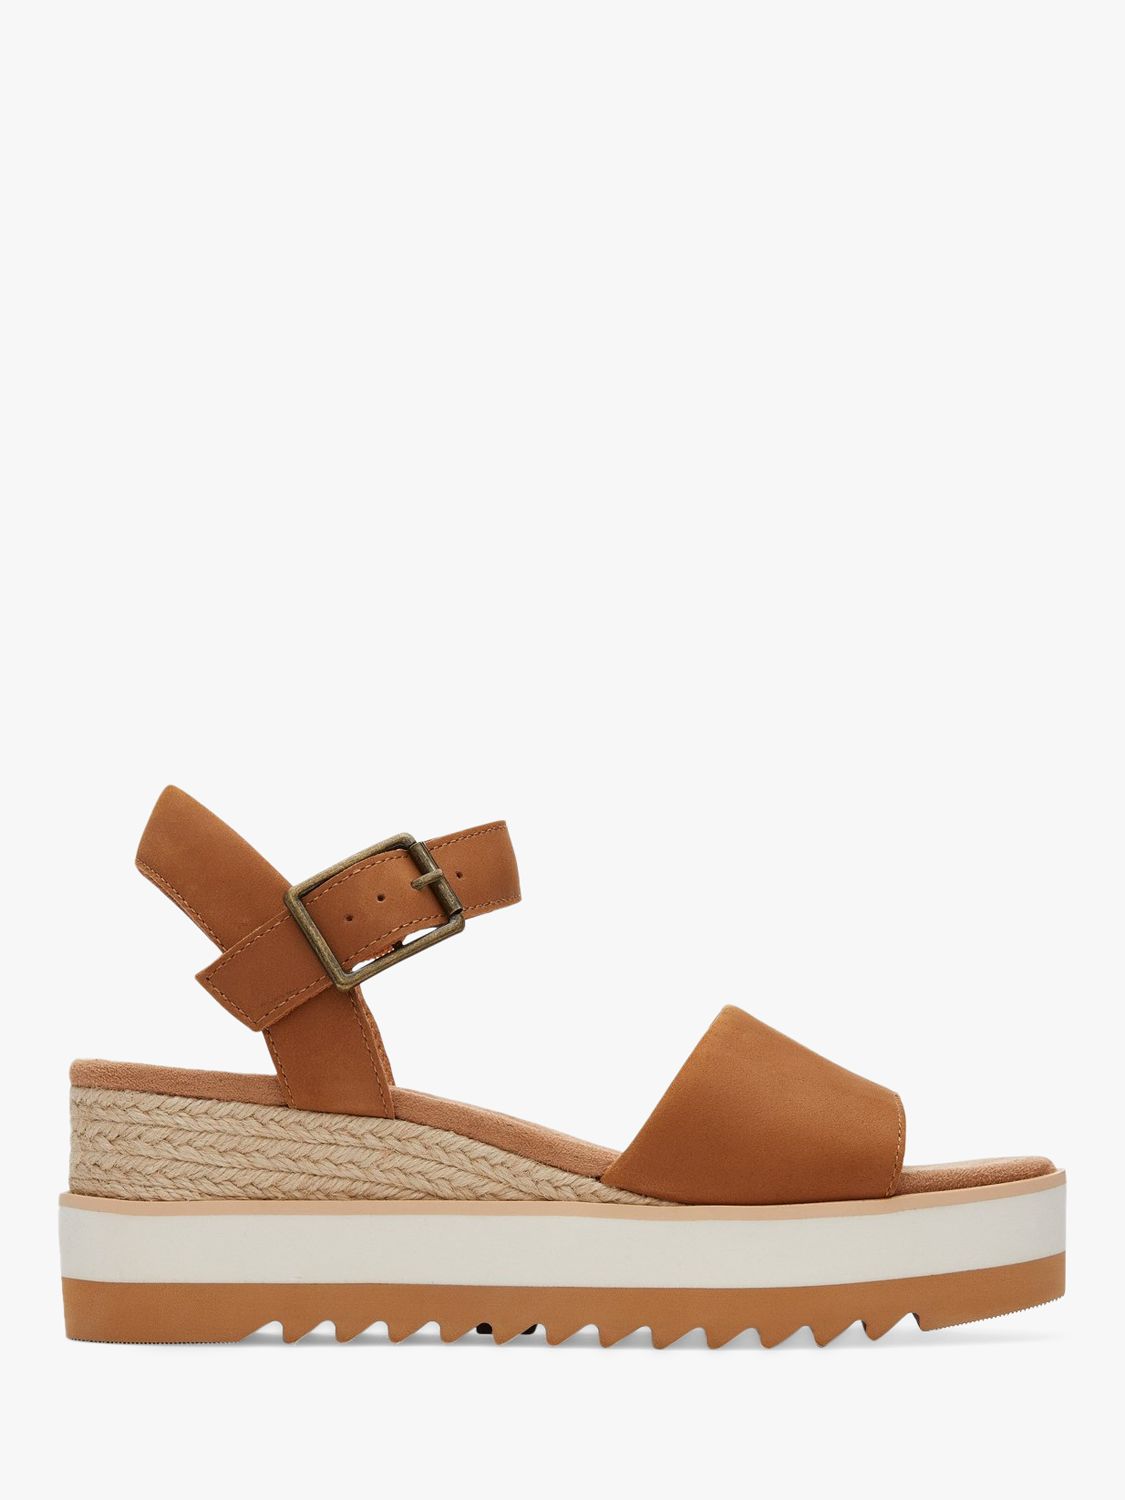 TOMS Diana Wedge Leather Sandals, Tan at John Lewis & Partners